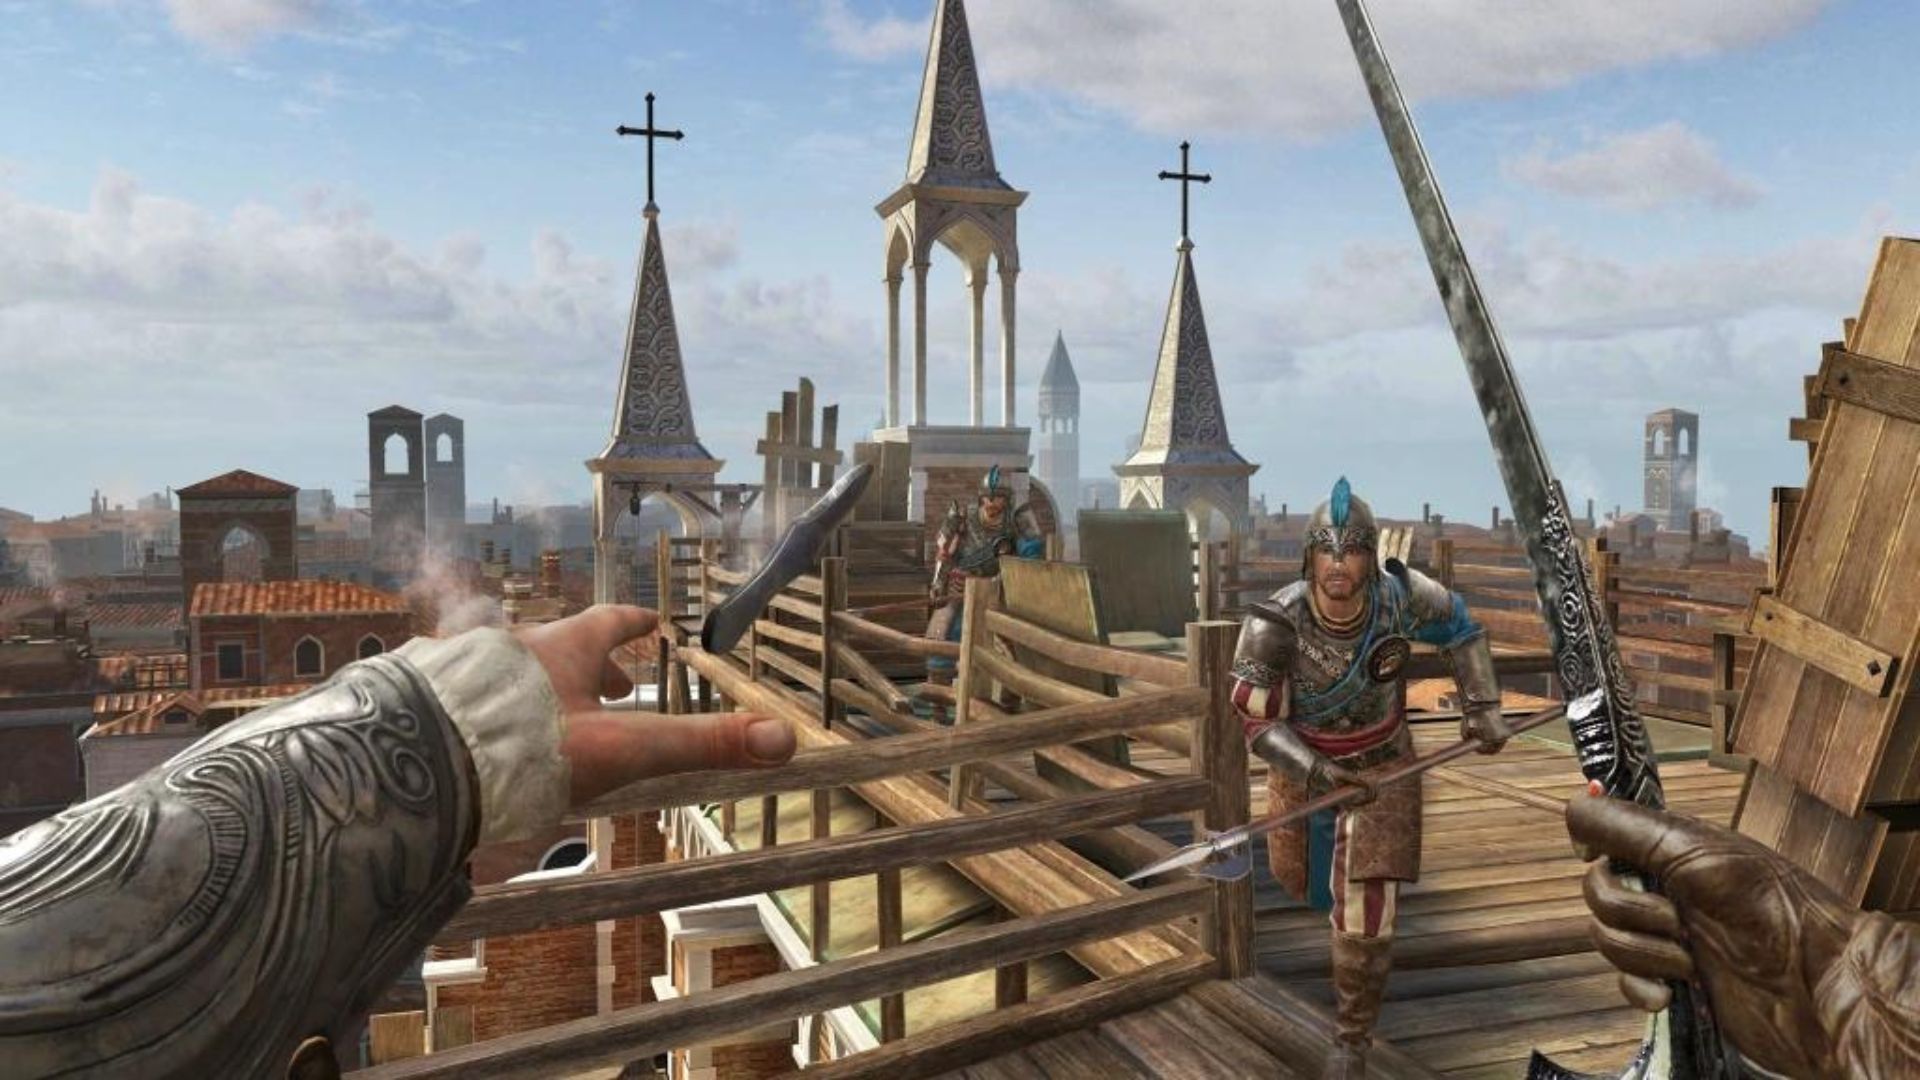 Facing an enemy atop a building with a city in the distance in Assassins Creed Nexus VR